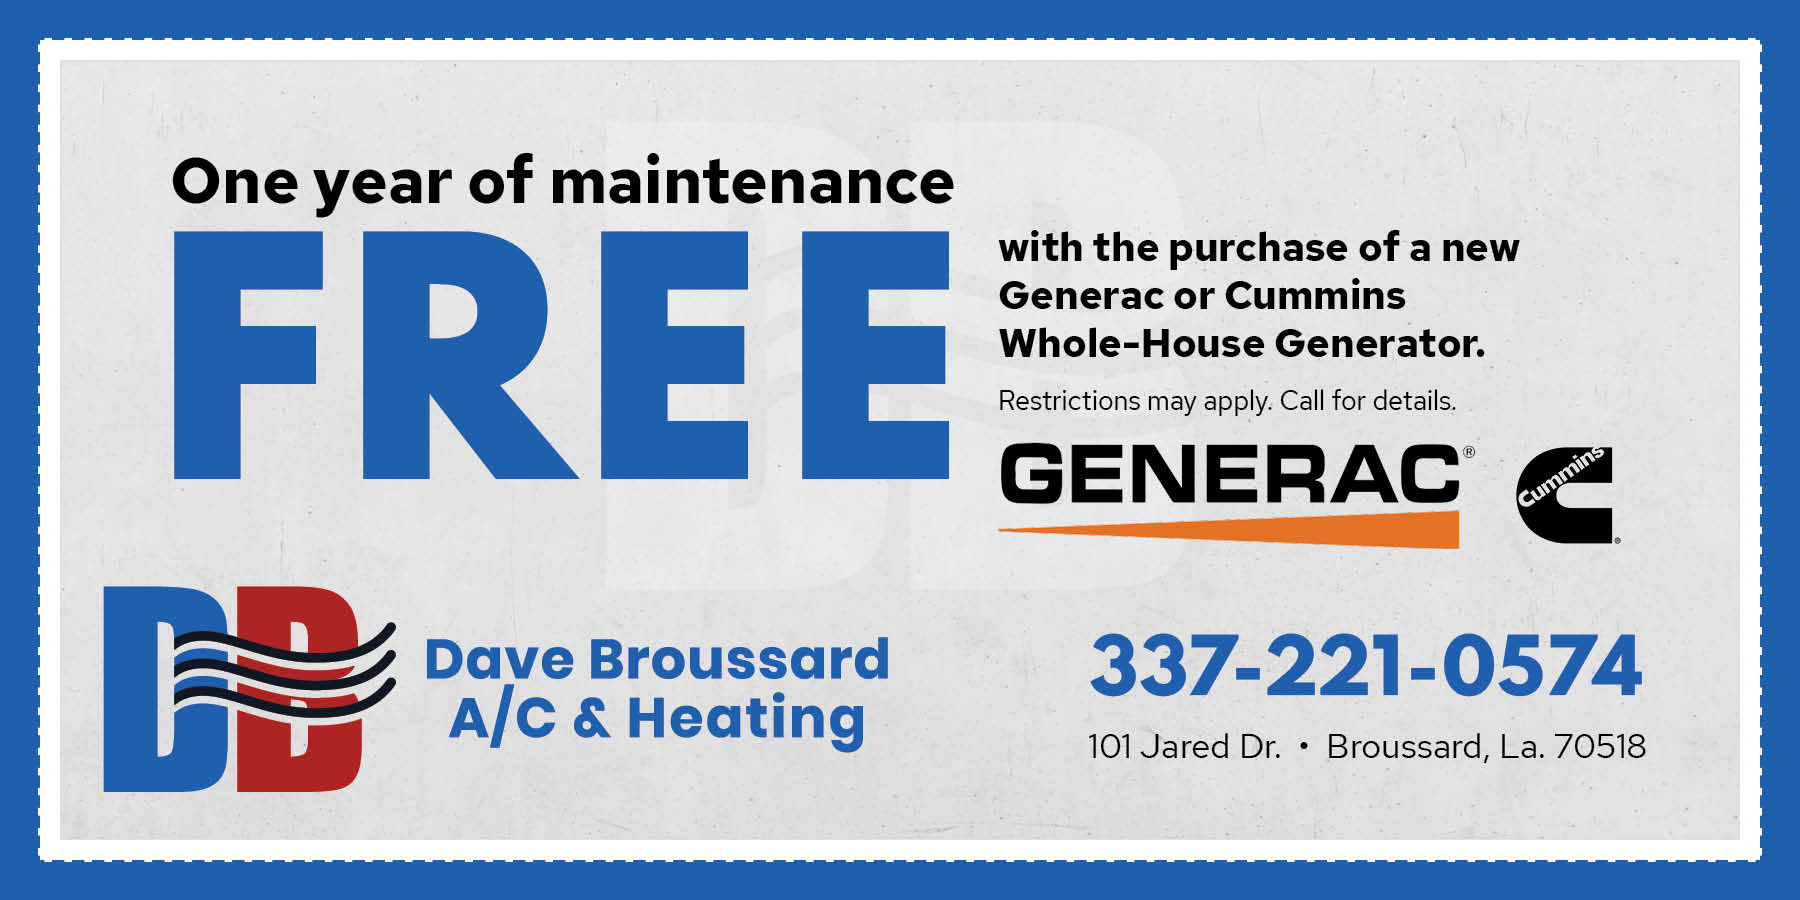 One year free maintenance with purchase of generac or cummins whole home generator